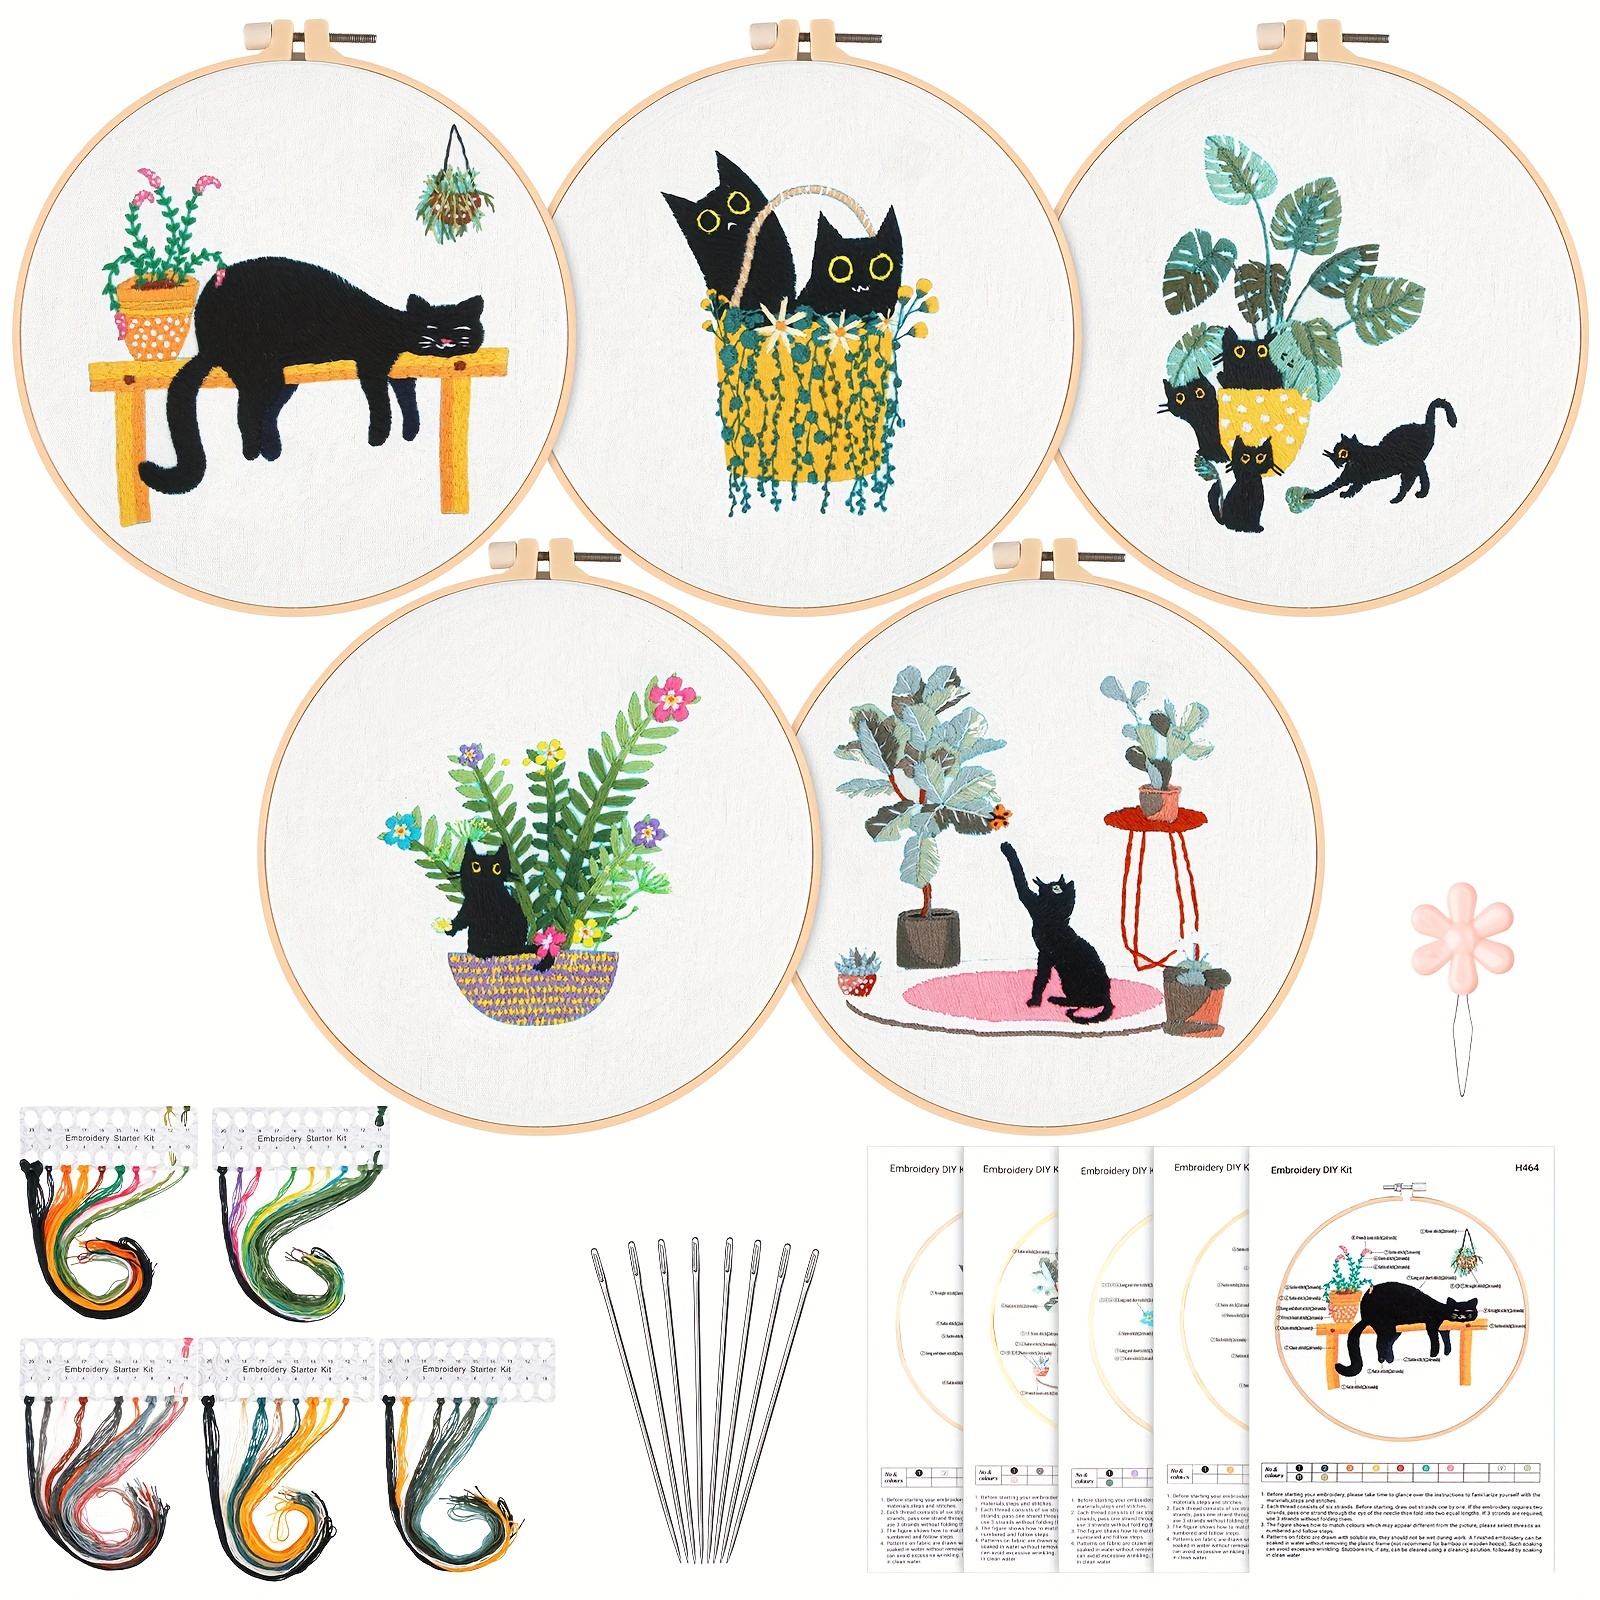 

5 Pcs Black Cat Embroidery Kit For Beginners Diy Adult Beginner Embroidery Kits With Patterns Instructions Include Embroidery Hoops Needlepoint Needles Threads For Adults Art Starter